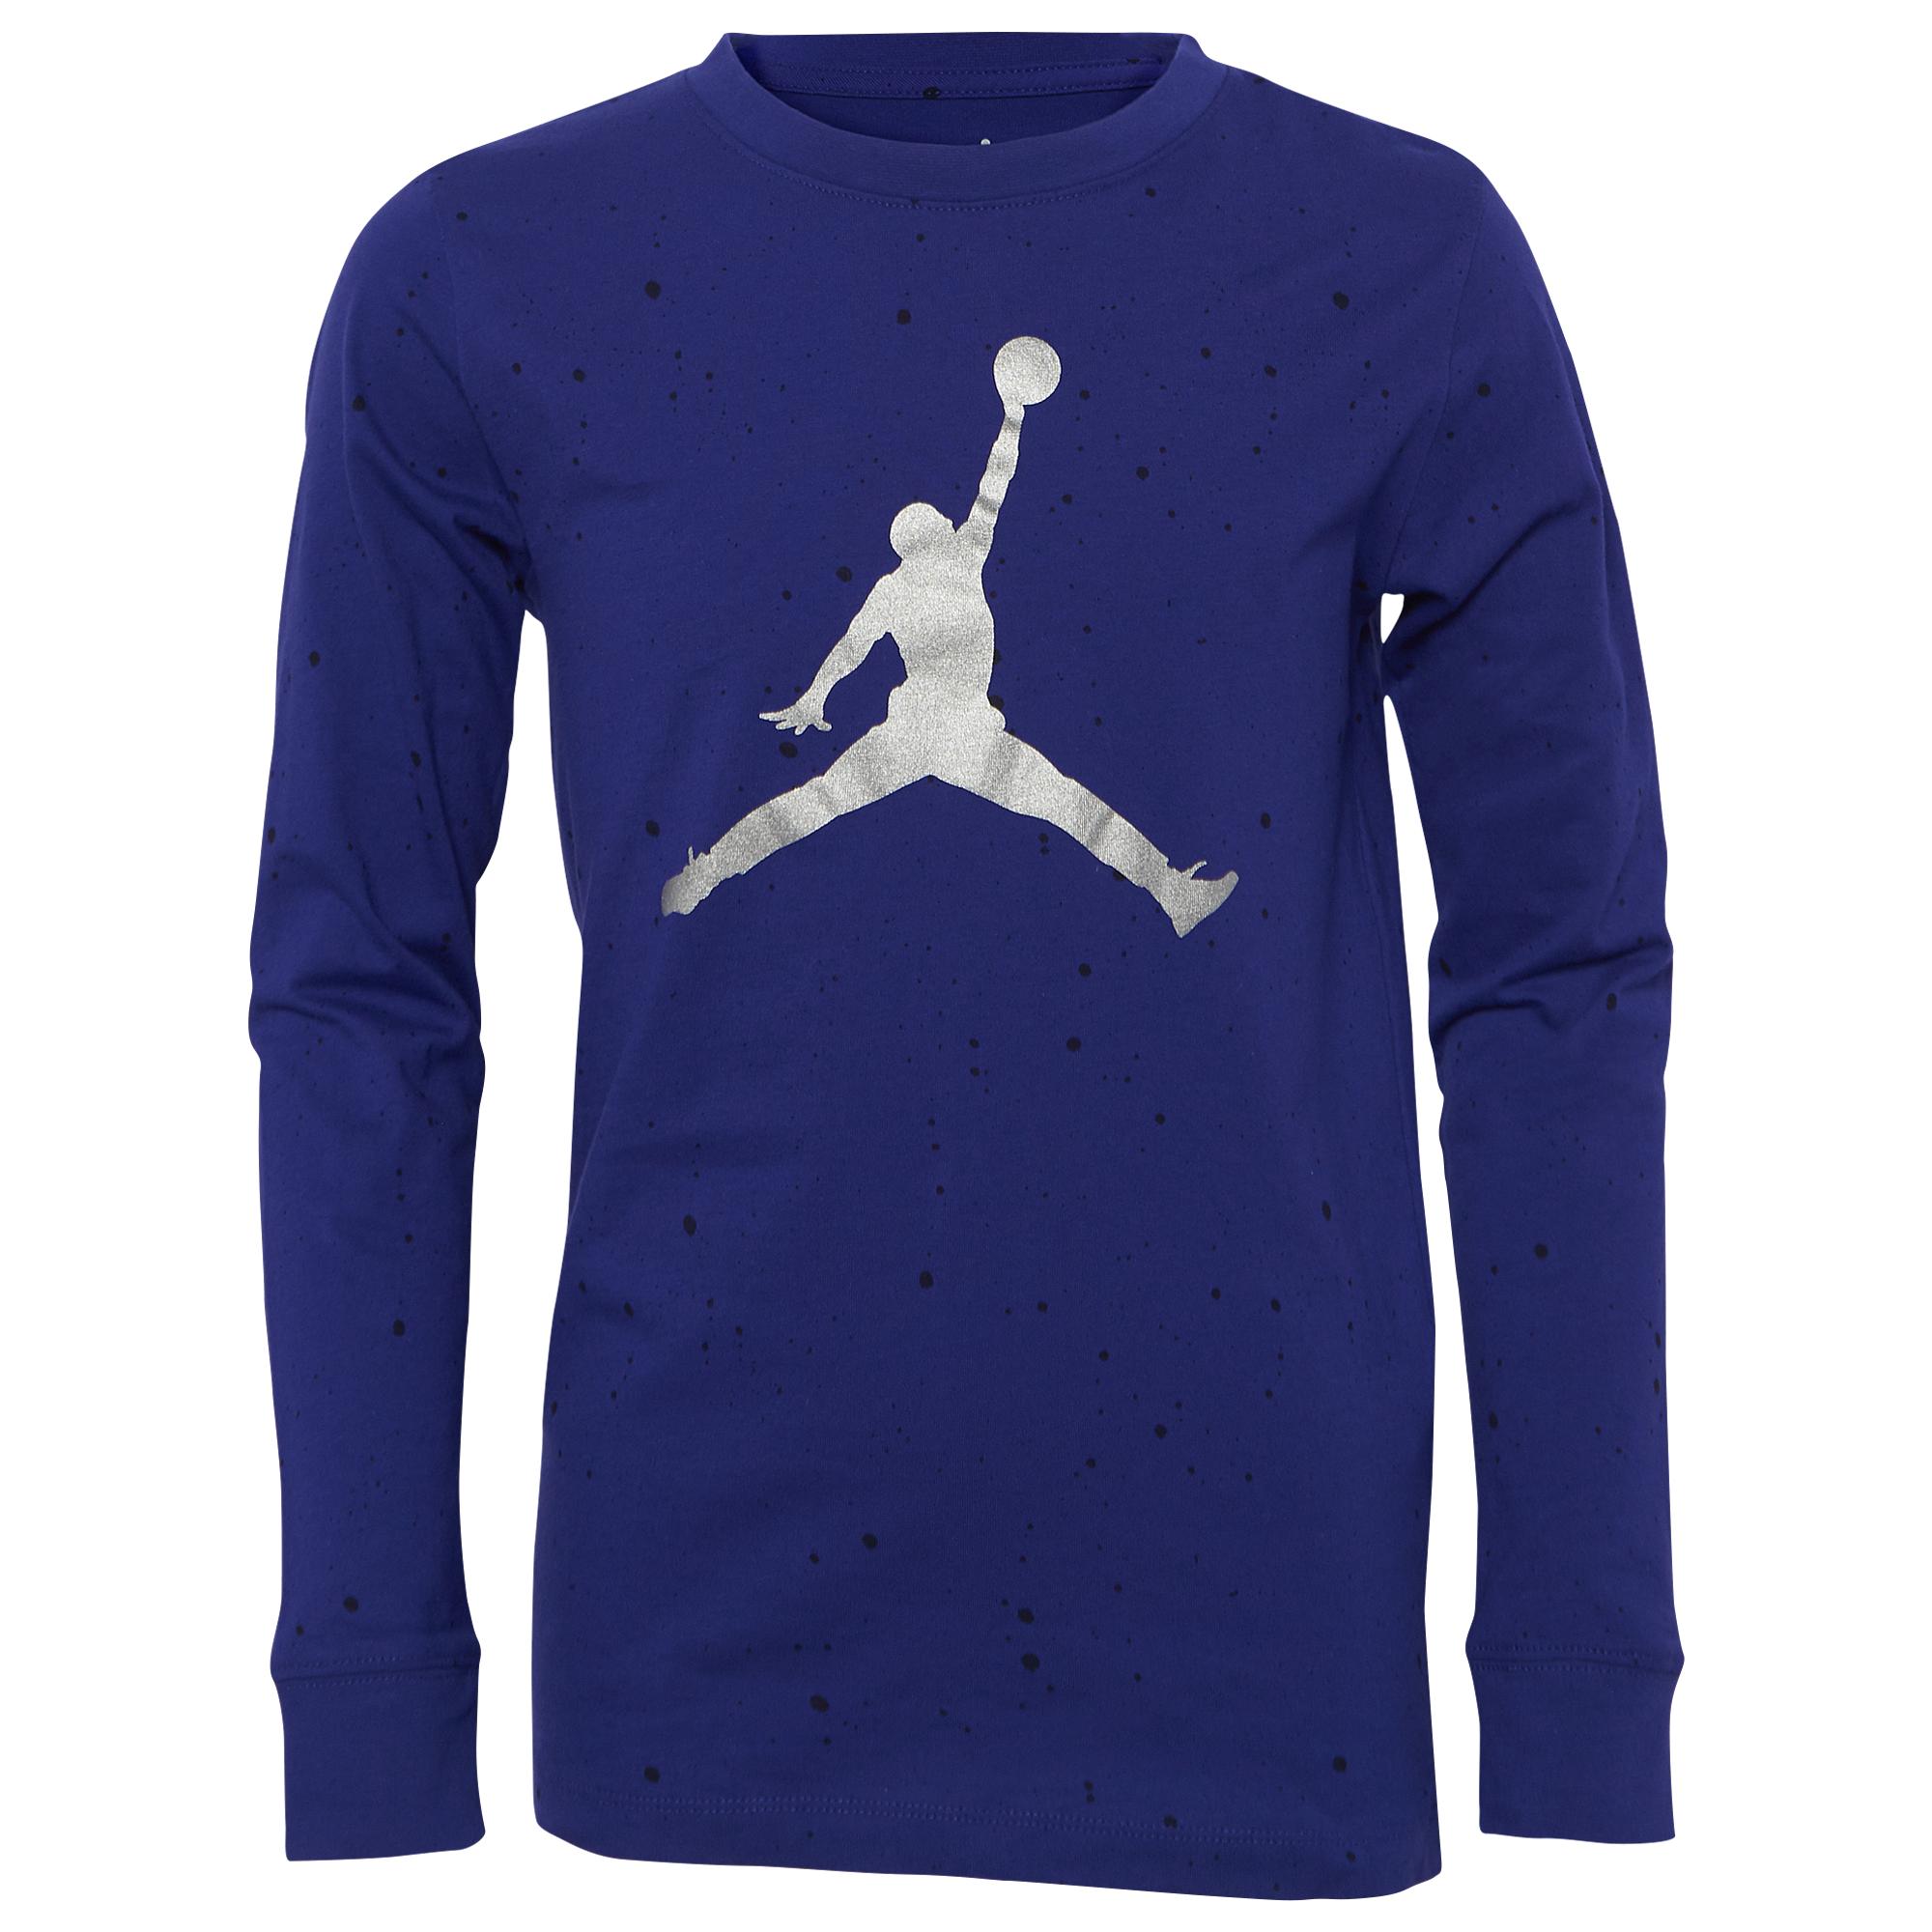 Nike Cotton Speckle Long Sleeve T-shirt in Blue for Men - Lyst